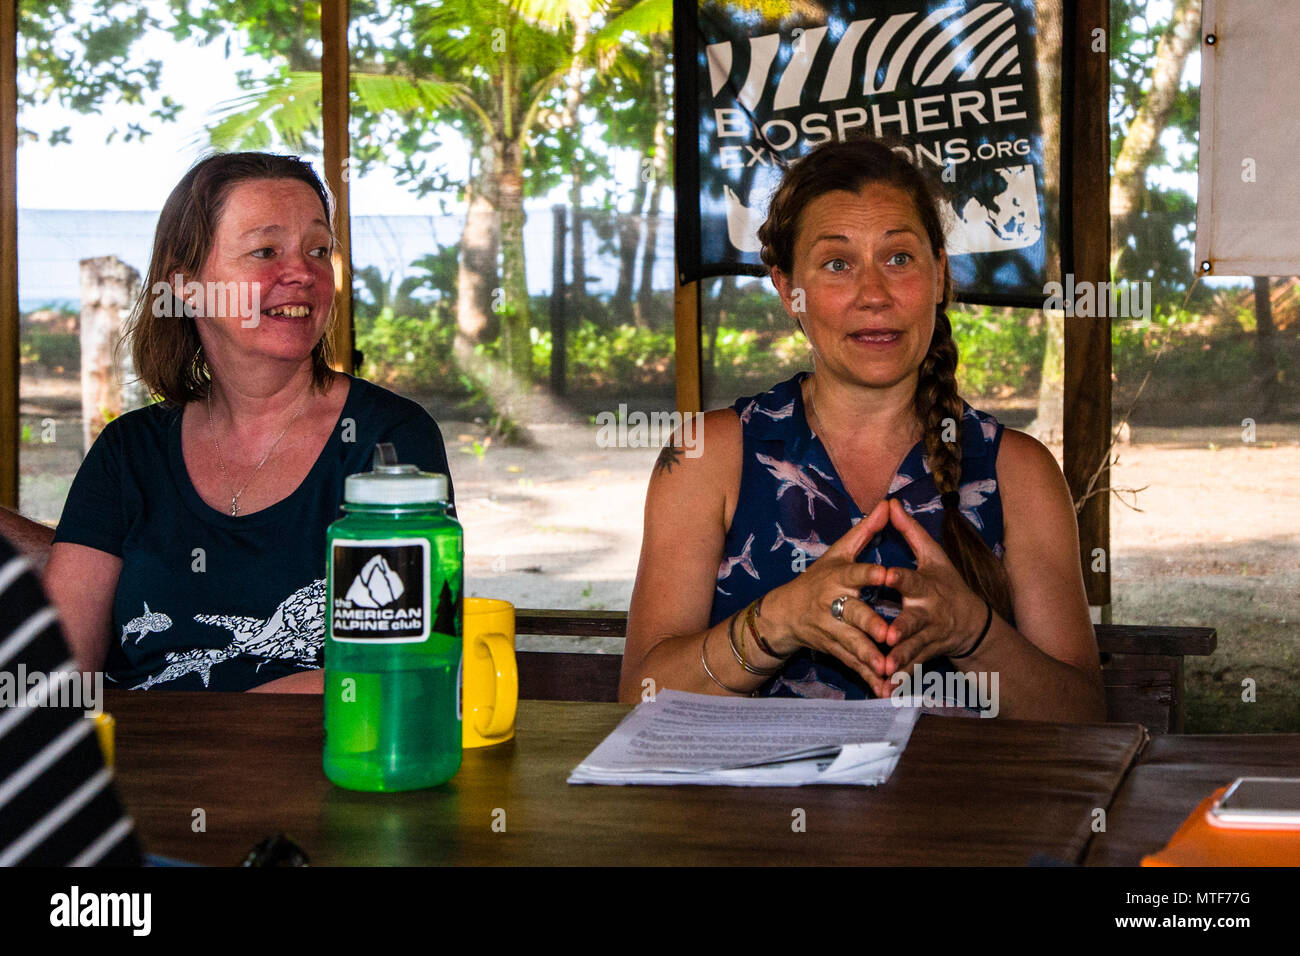 Lecture at Biosphere citizen science project for sea turtles protection in Costa Rica. Swedish expedition leader Ida Vincent (r.) with initial advice on procedures at the research station Stock Photo